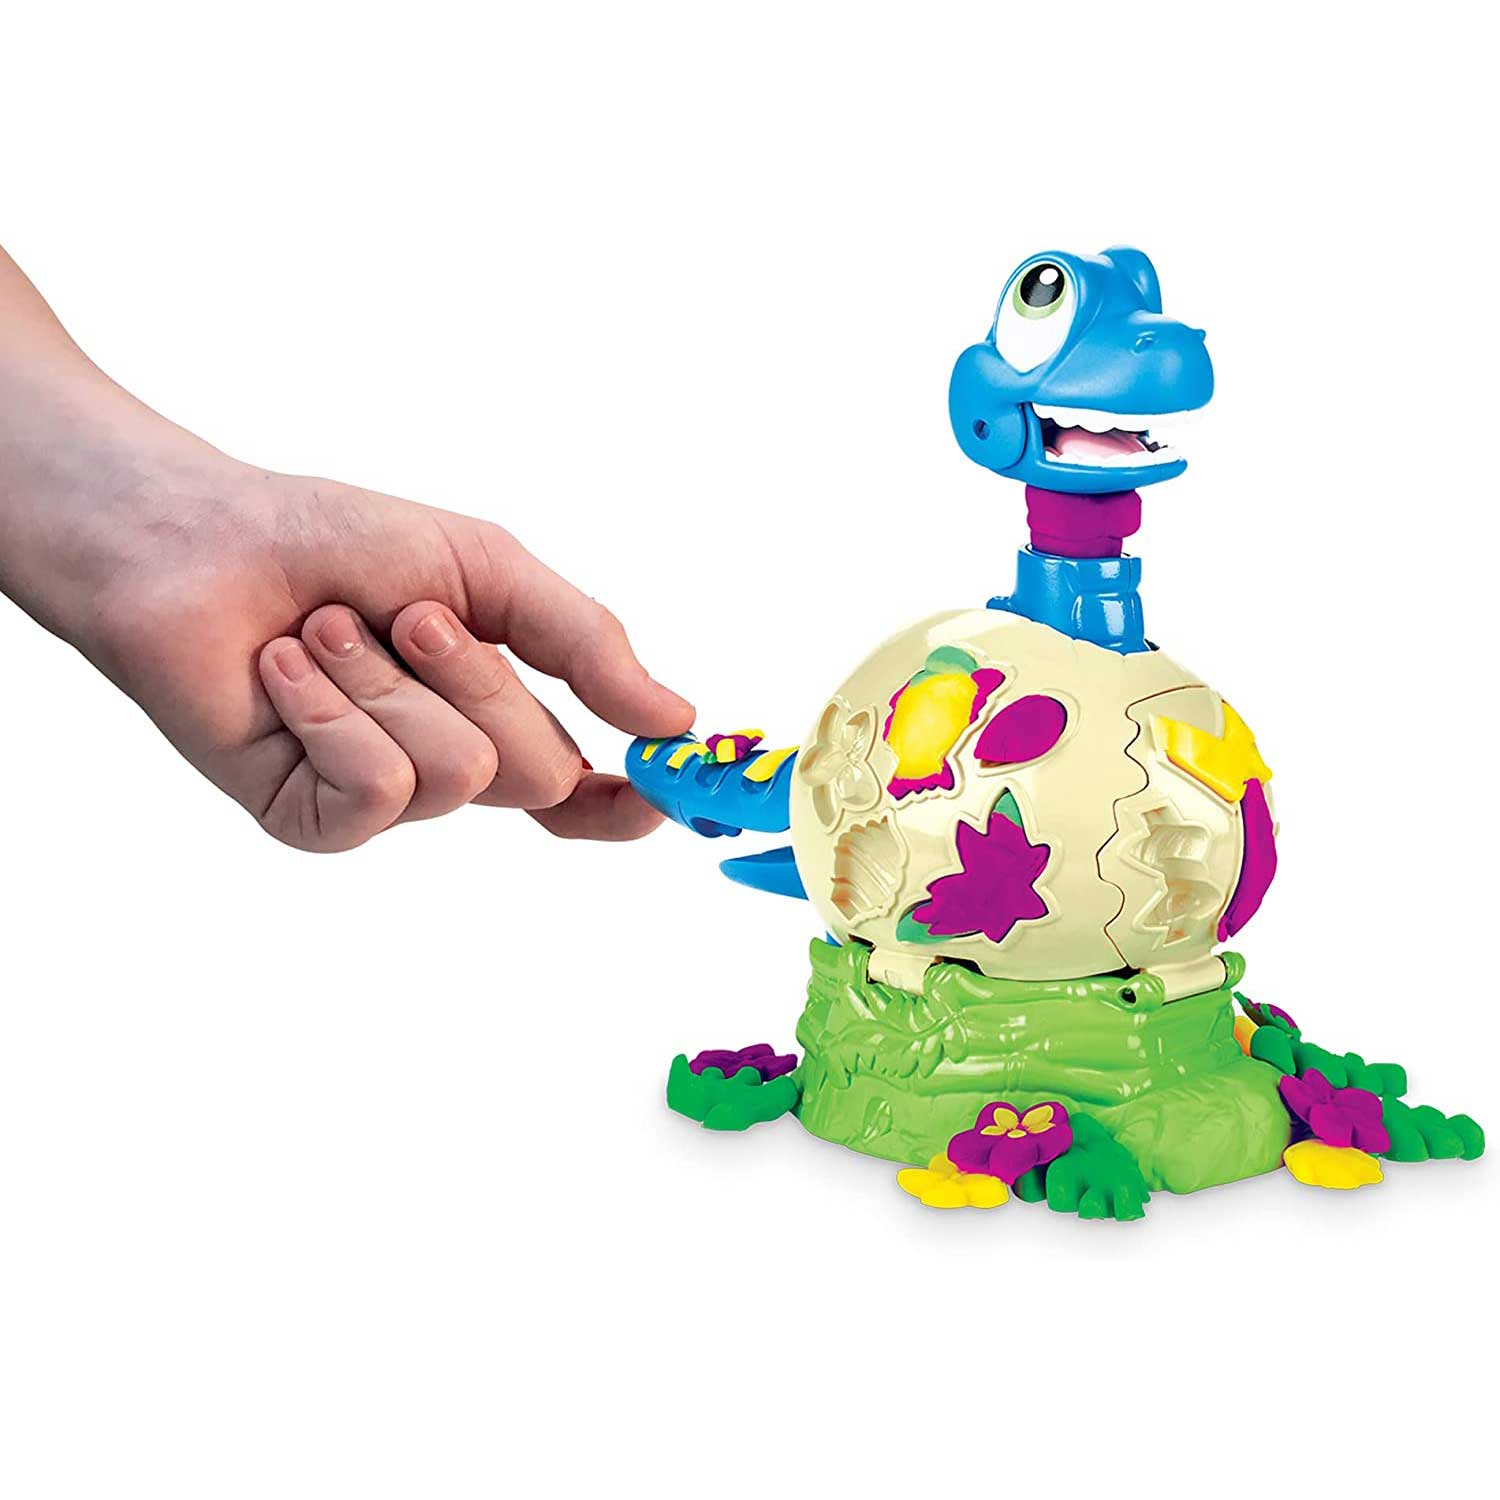 Play-Doh Dino Tools Dinosaur Toys with 3 Cans of Play-Doh Colors